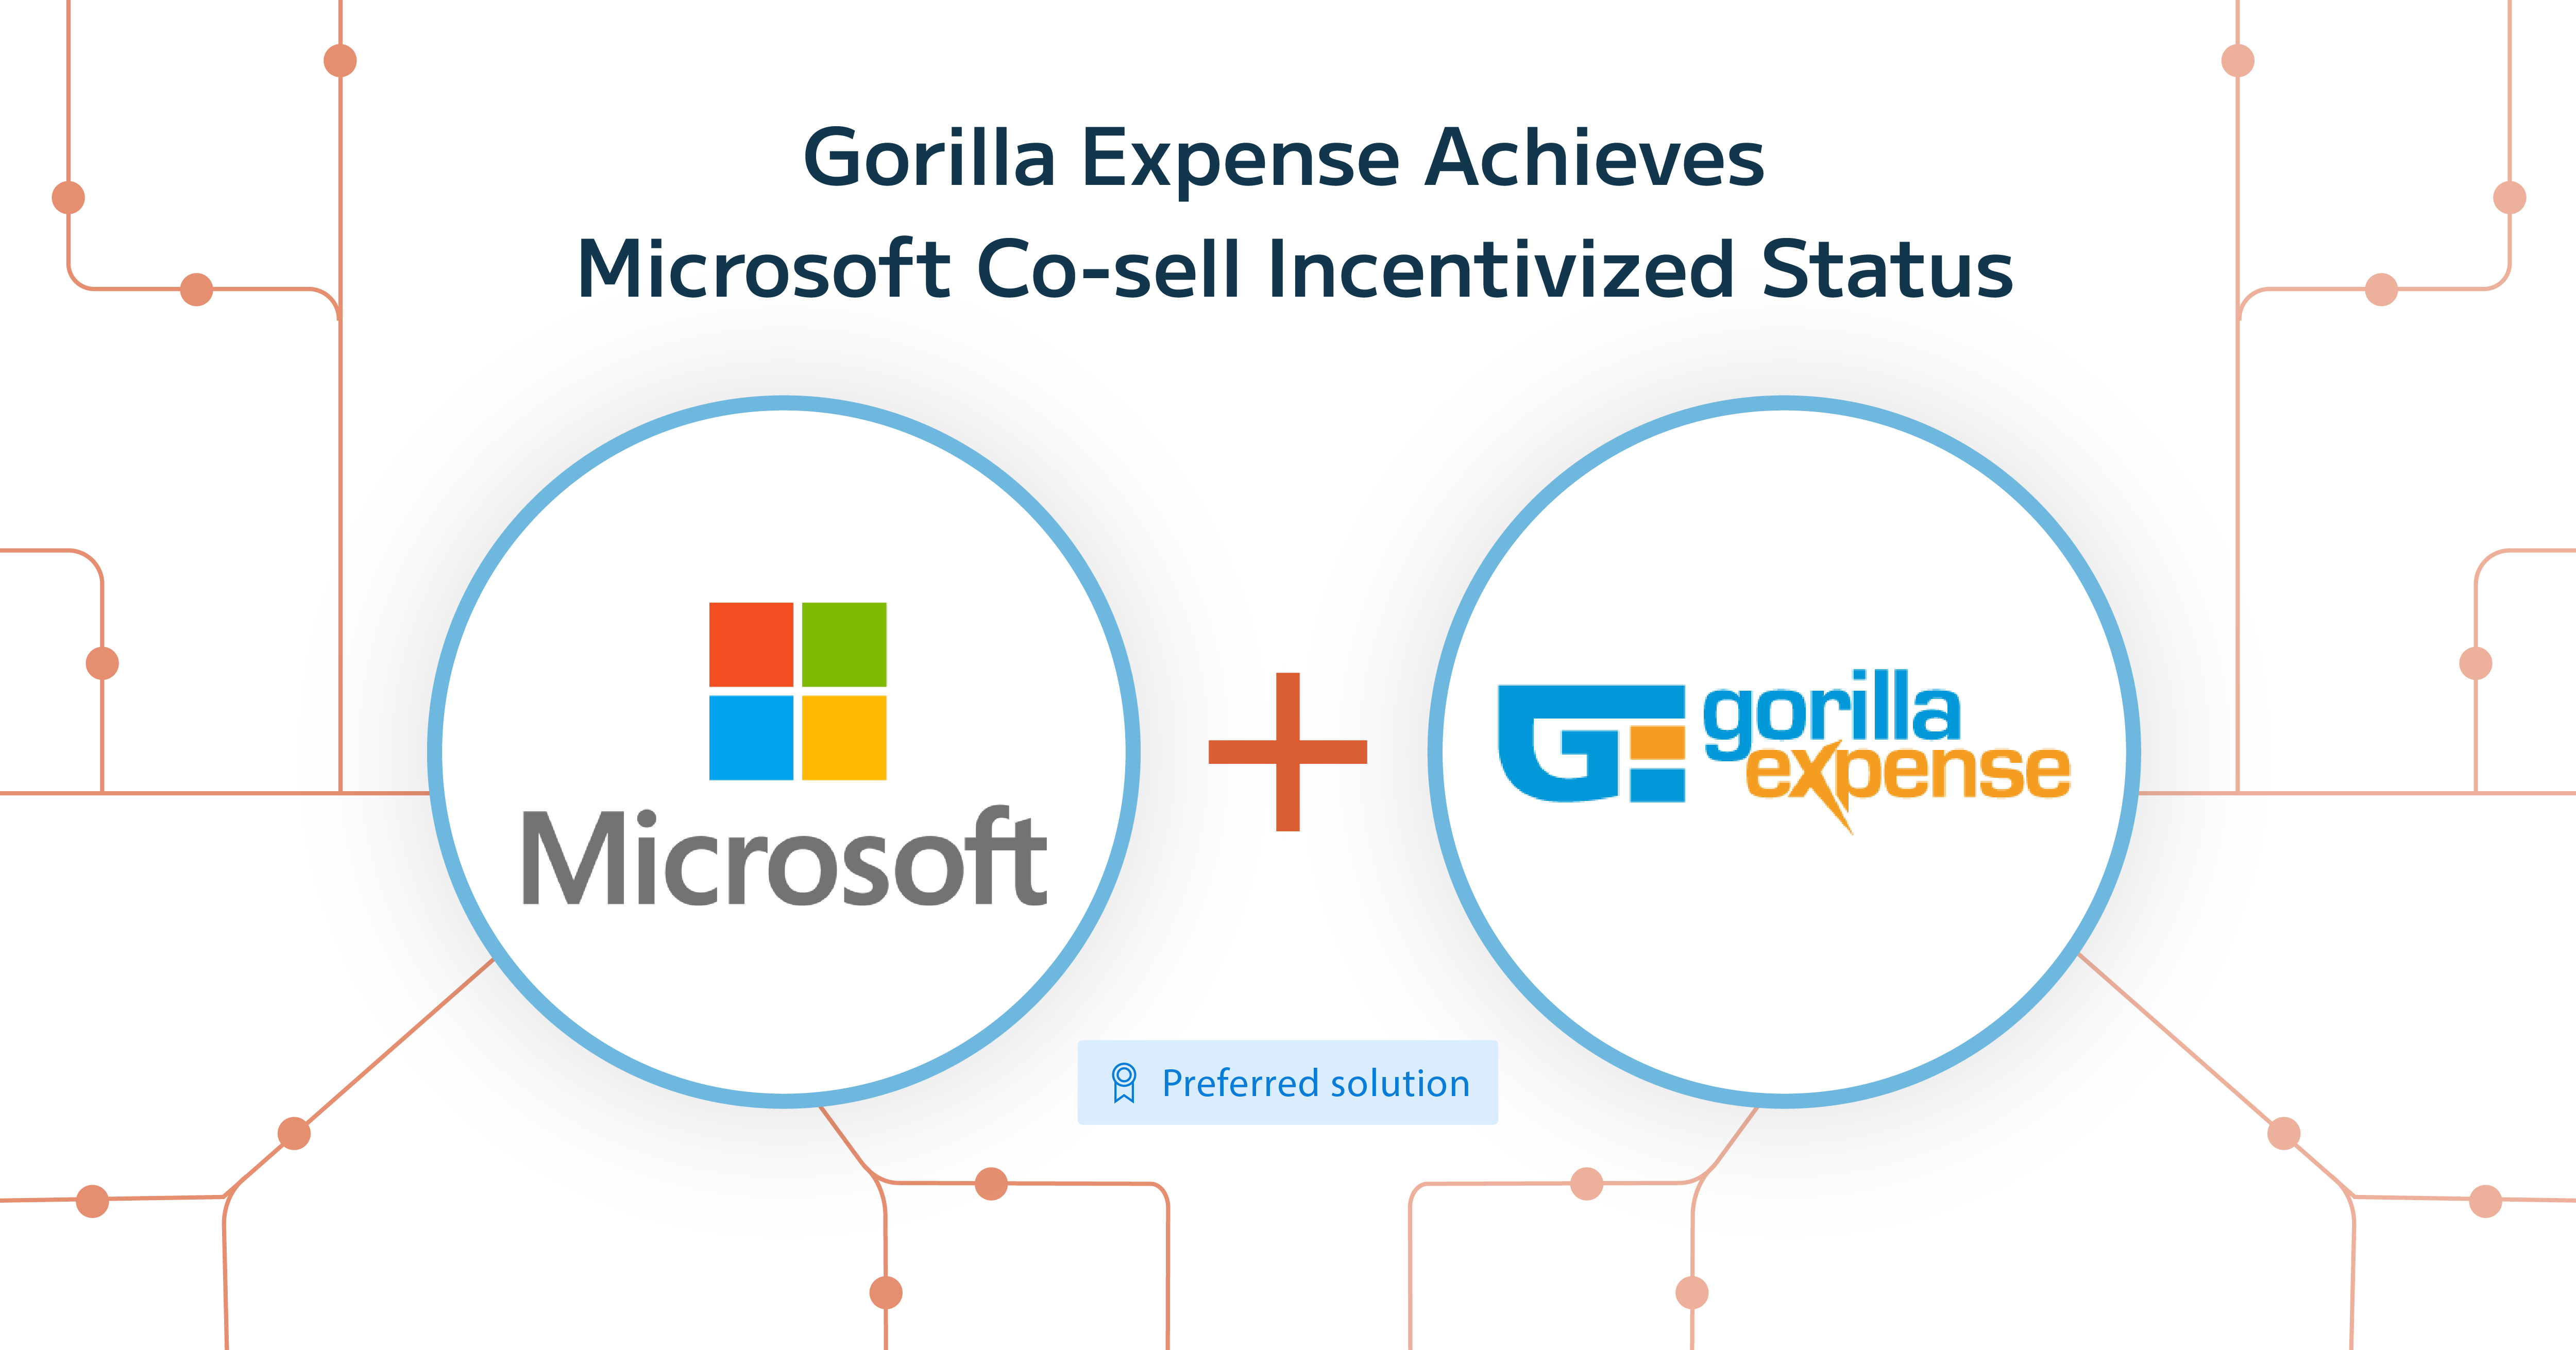 Gorilla Expense Achieves the Azure IP Co-sell Incentive Status with Microsoft